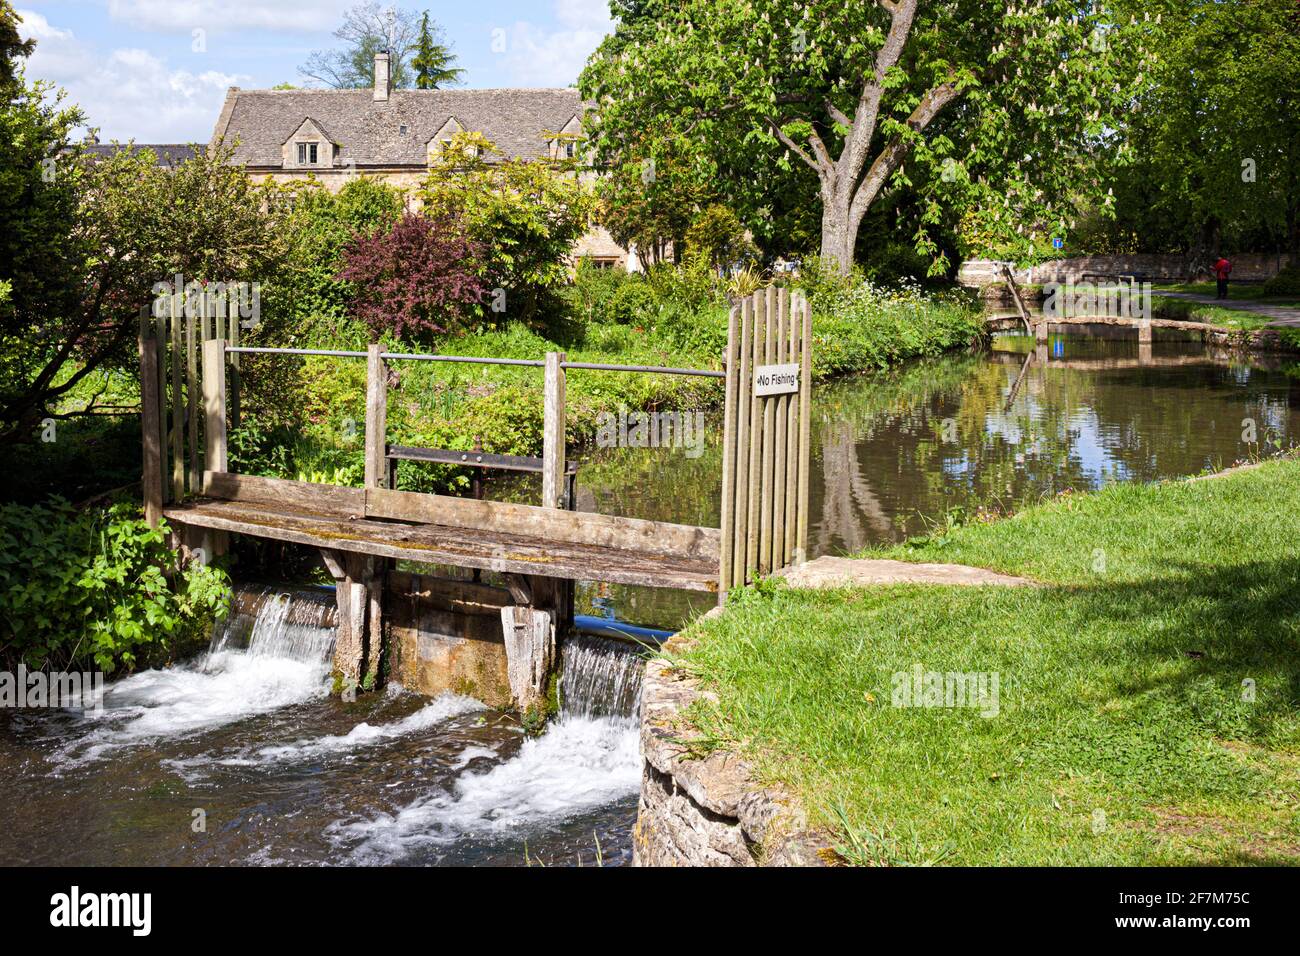 The River Eye flowing through the Cotswold village of Lower Slaughter, Gloucestershire UK Stock Photo